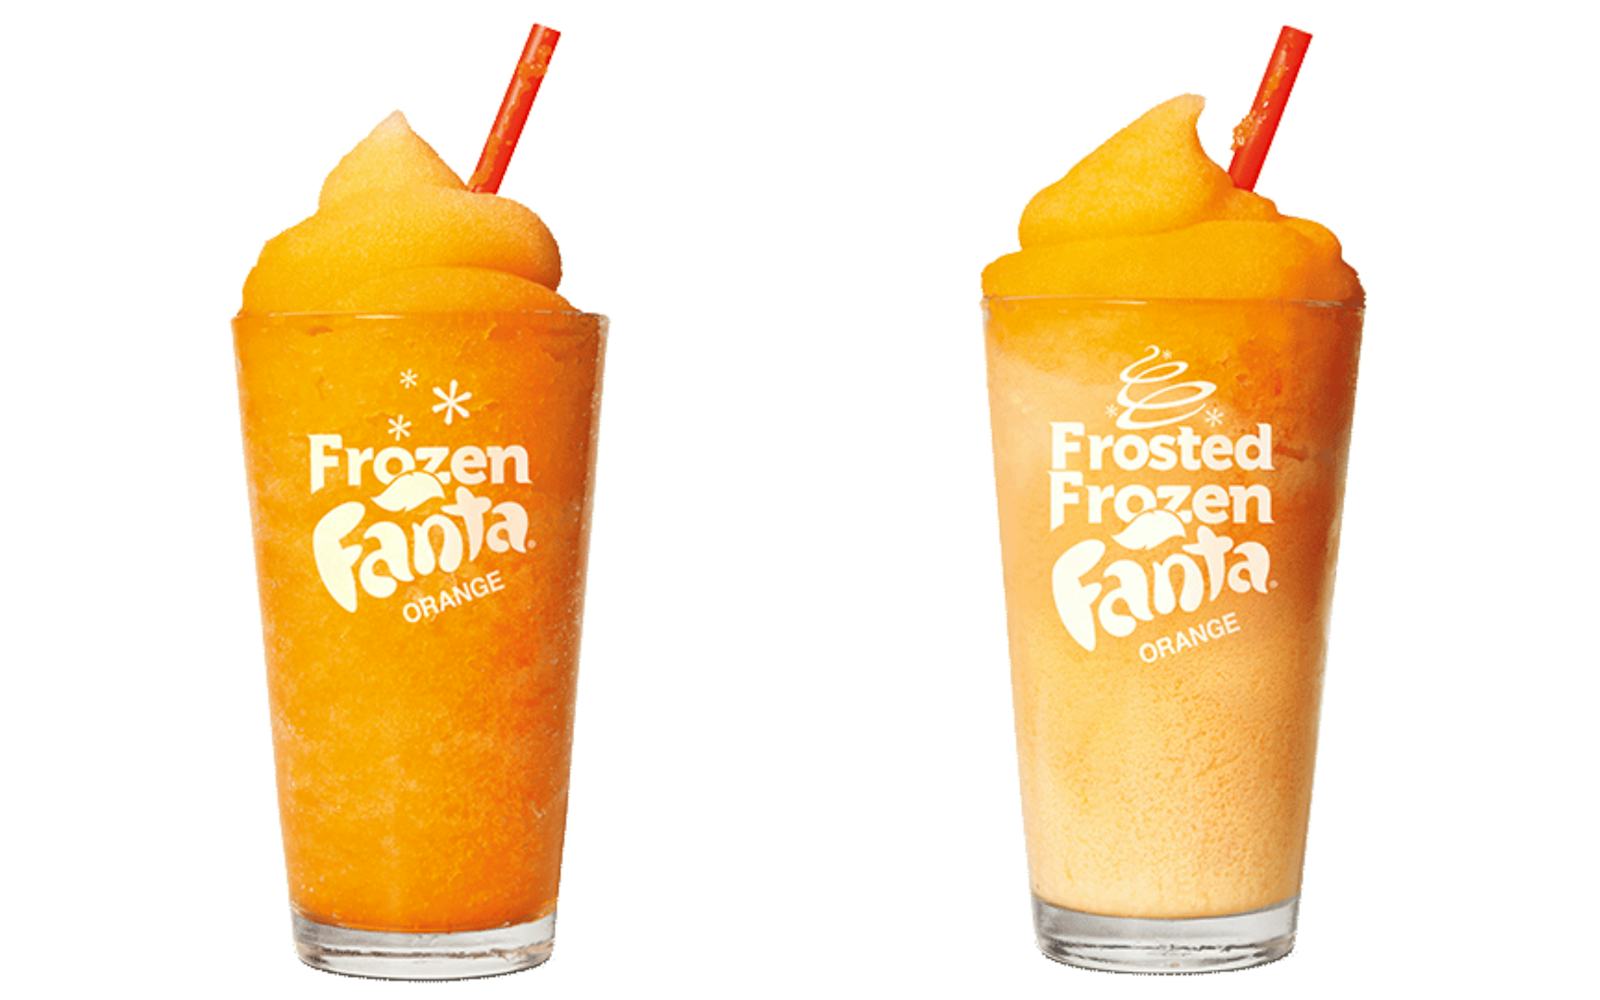 Burger King Debuts TWO New Frozen Fanta Drinks That Are Tasty TBTs